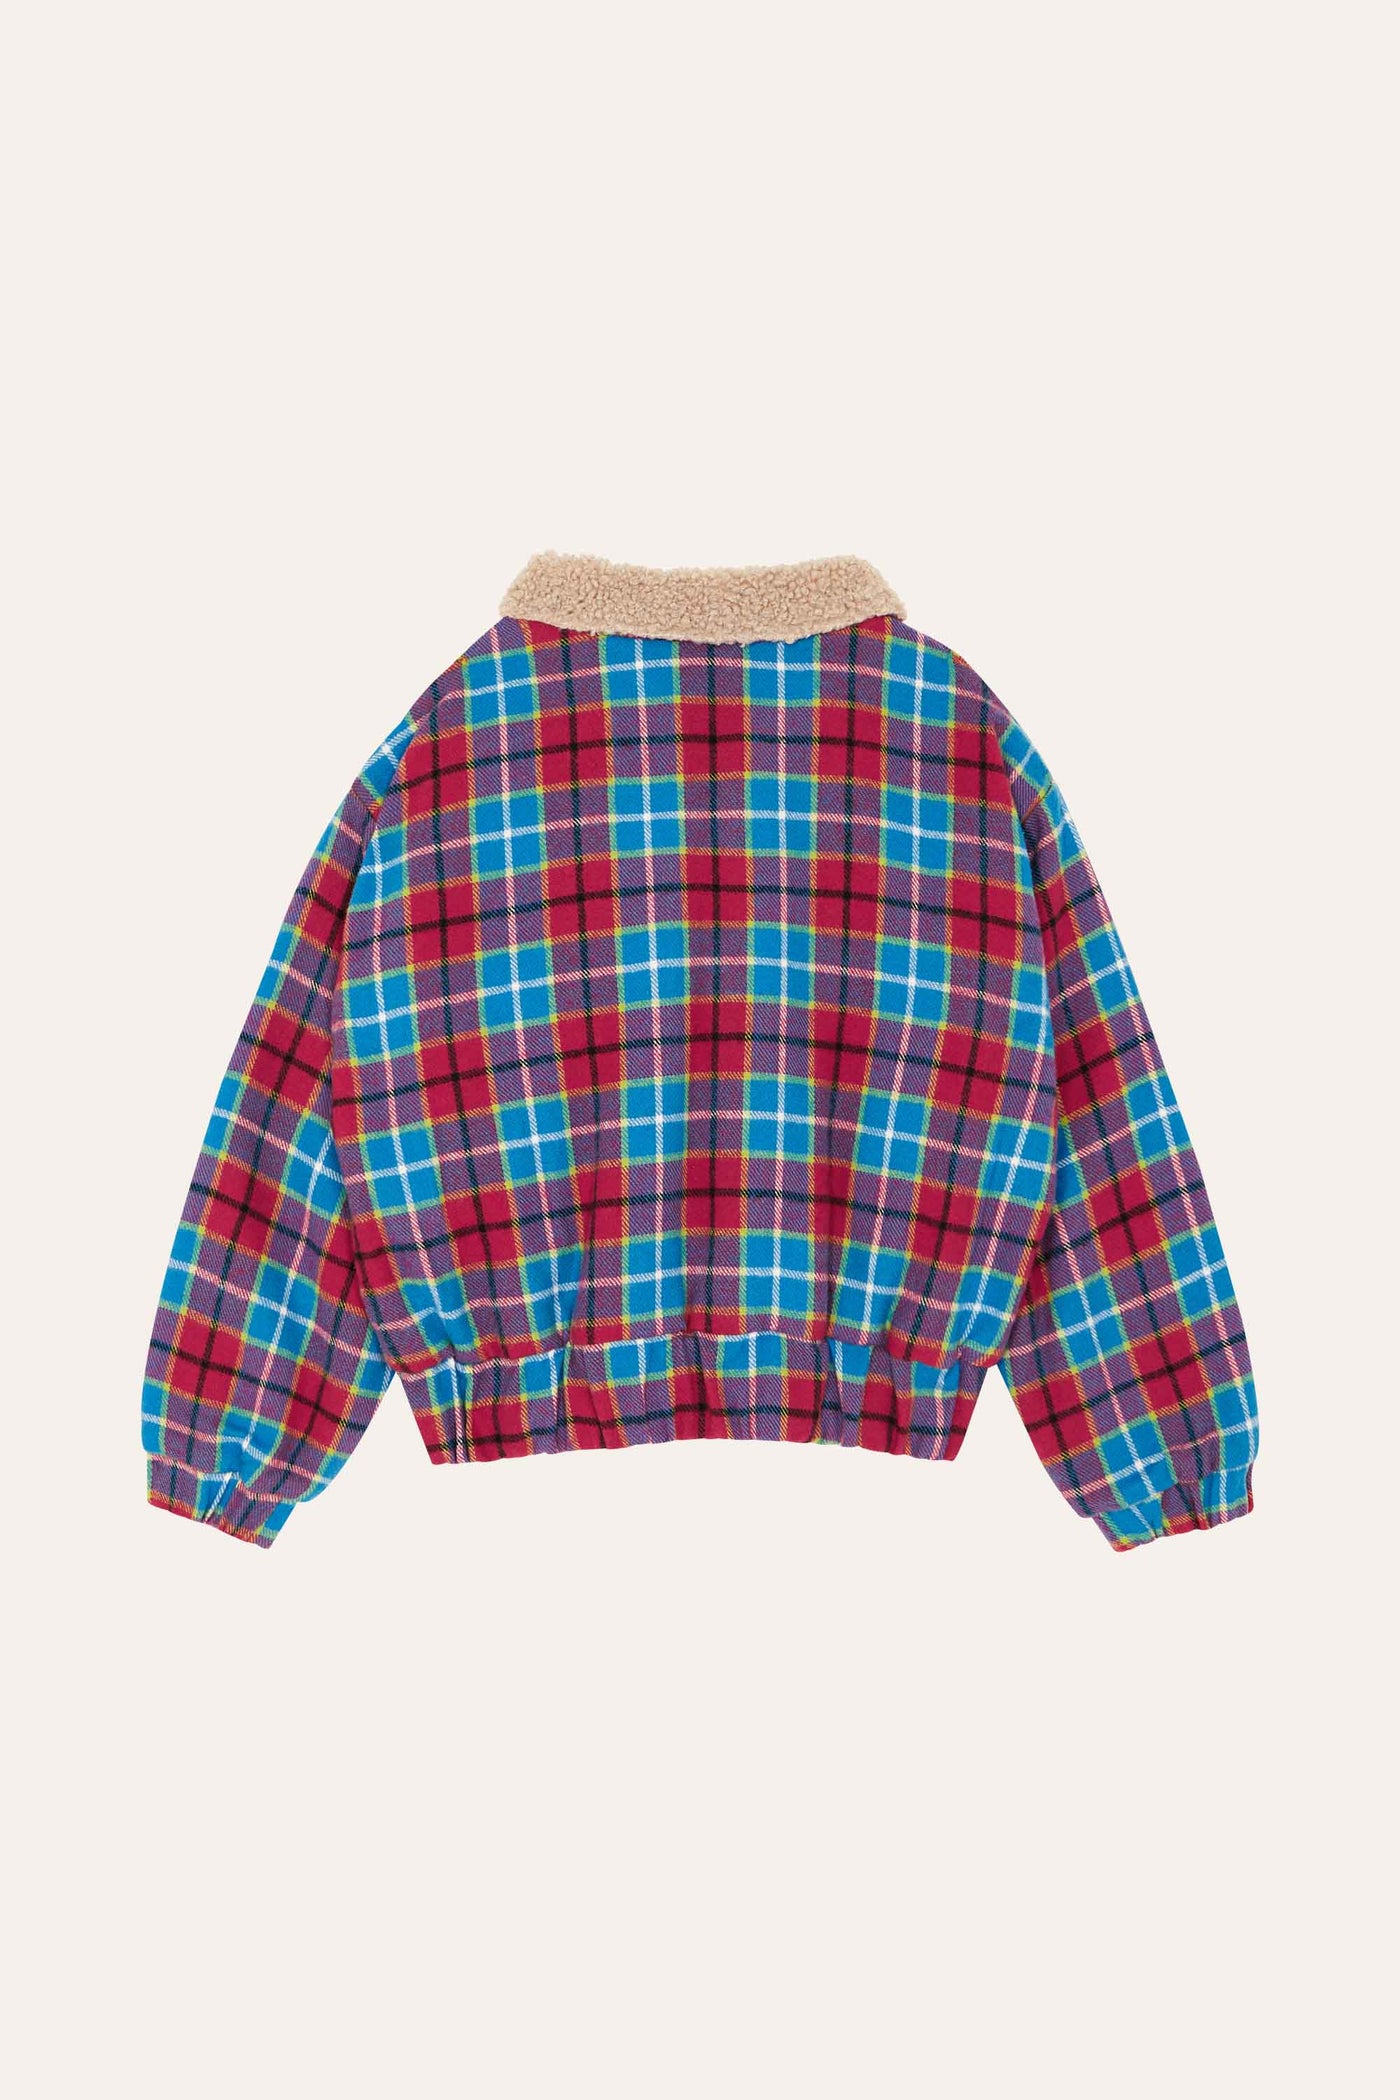 The Campamento Red & Blue Checked Jacket